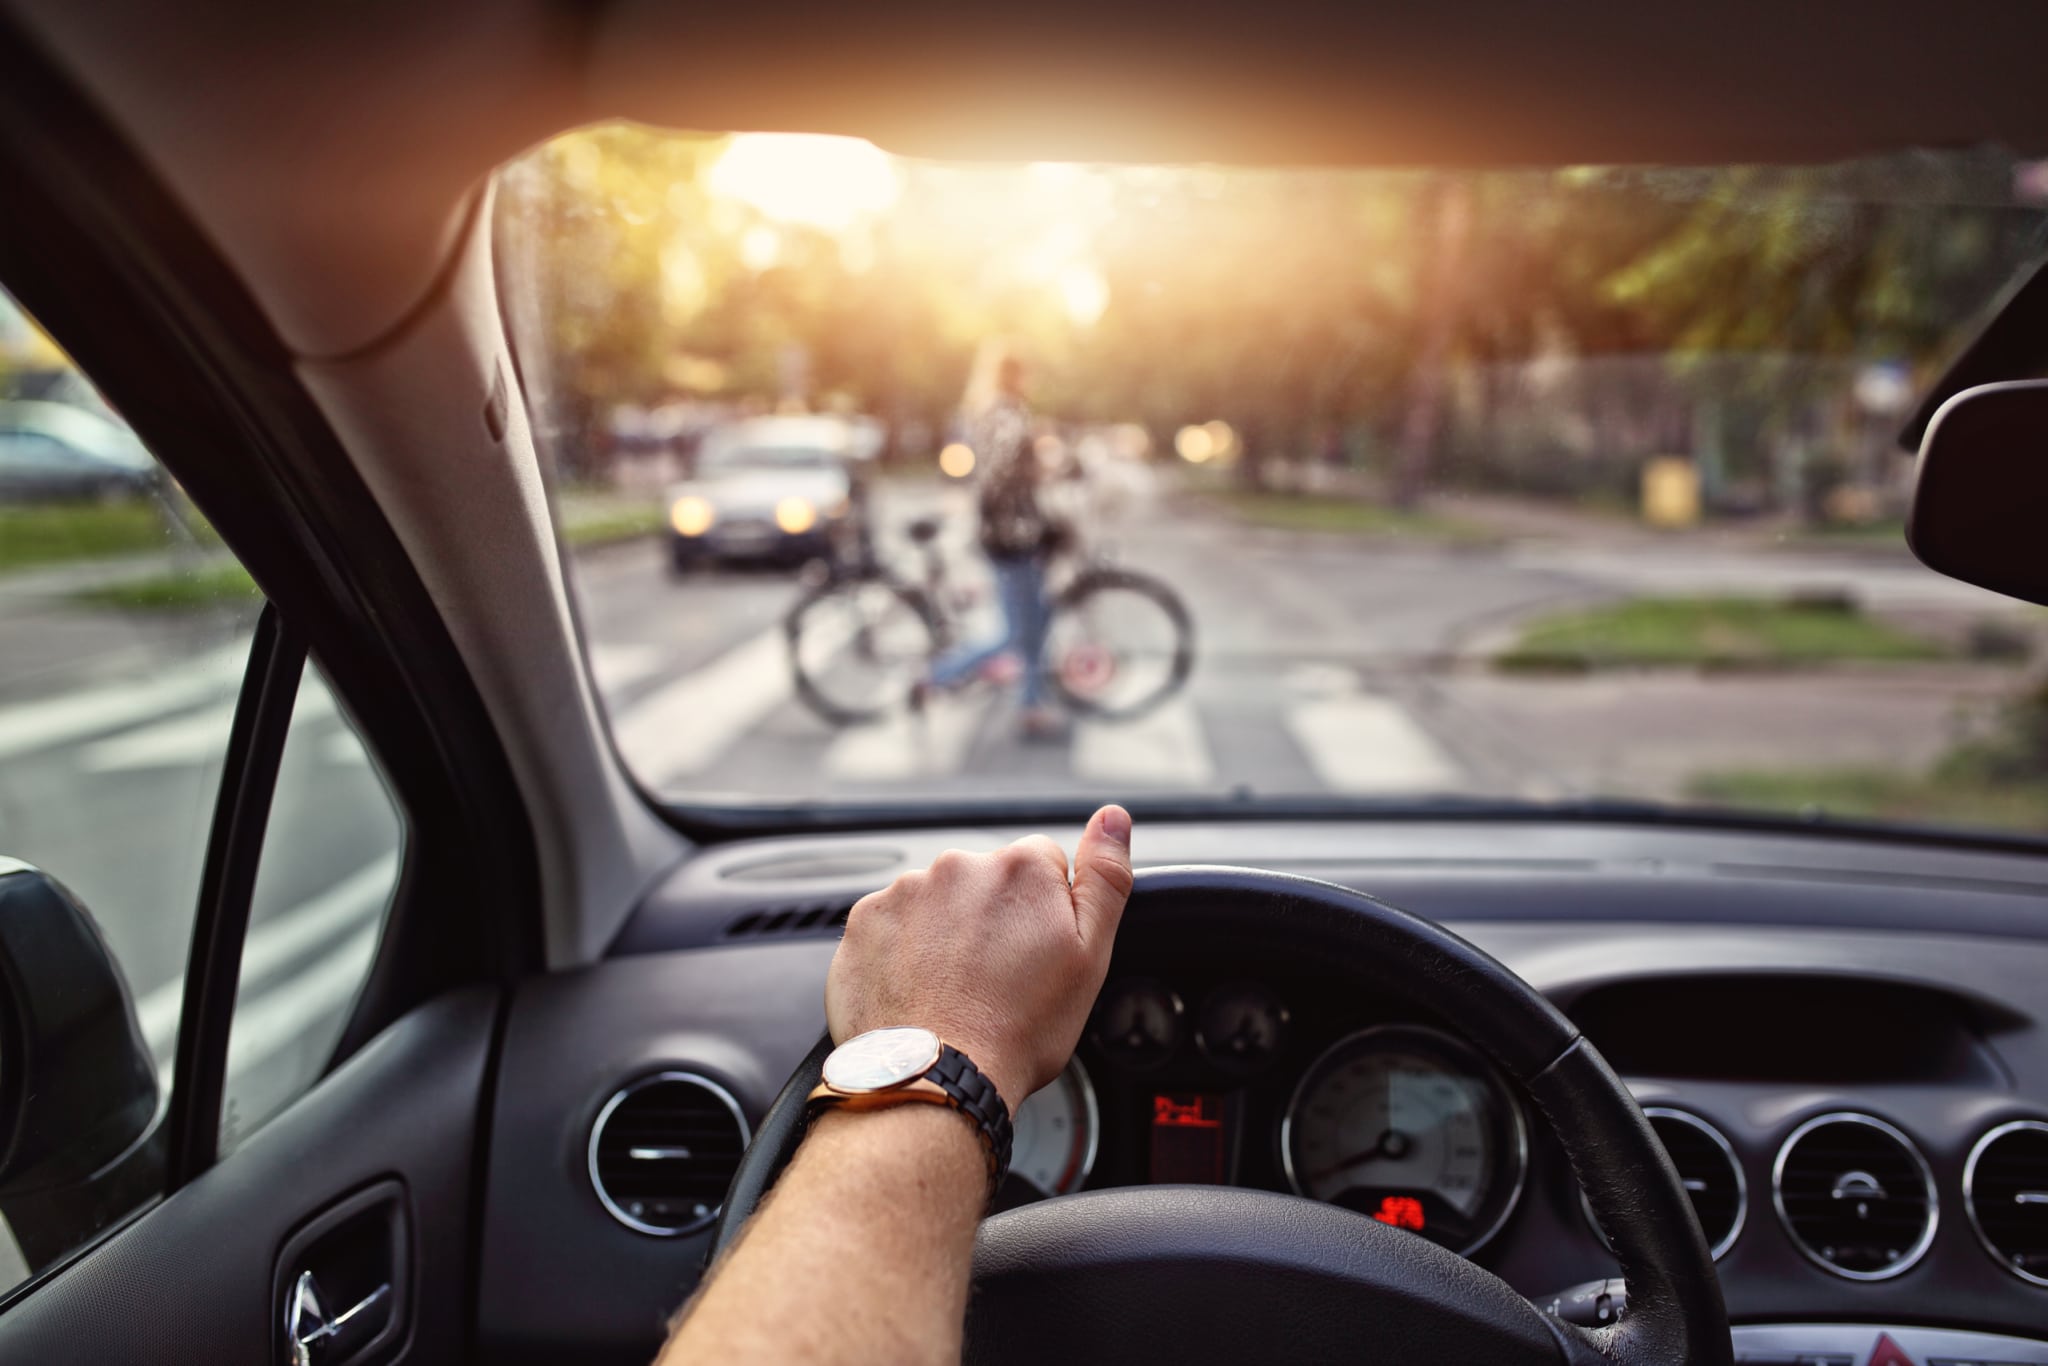 How To Drive Safely Around Bicyclists: Tips Every Driver Should Know